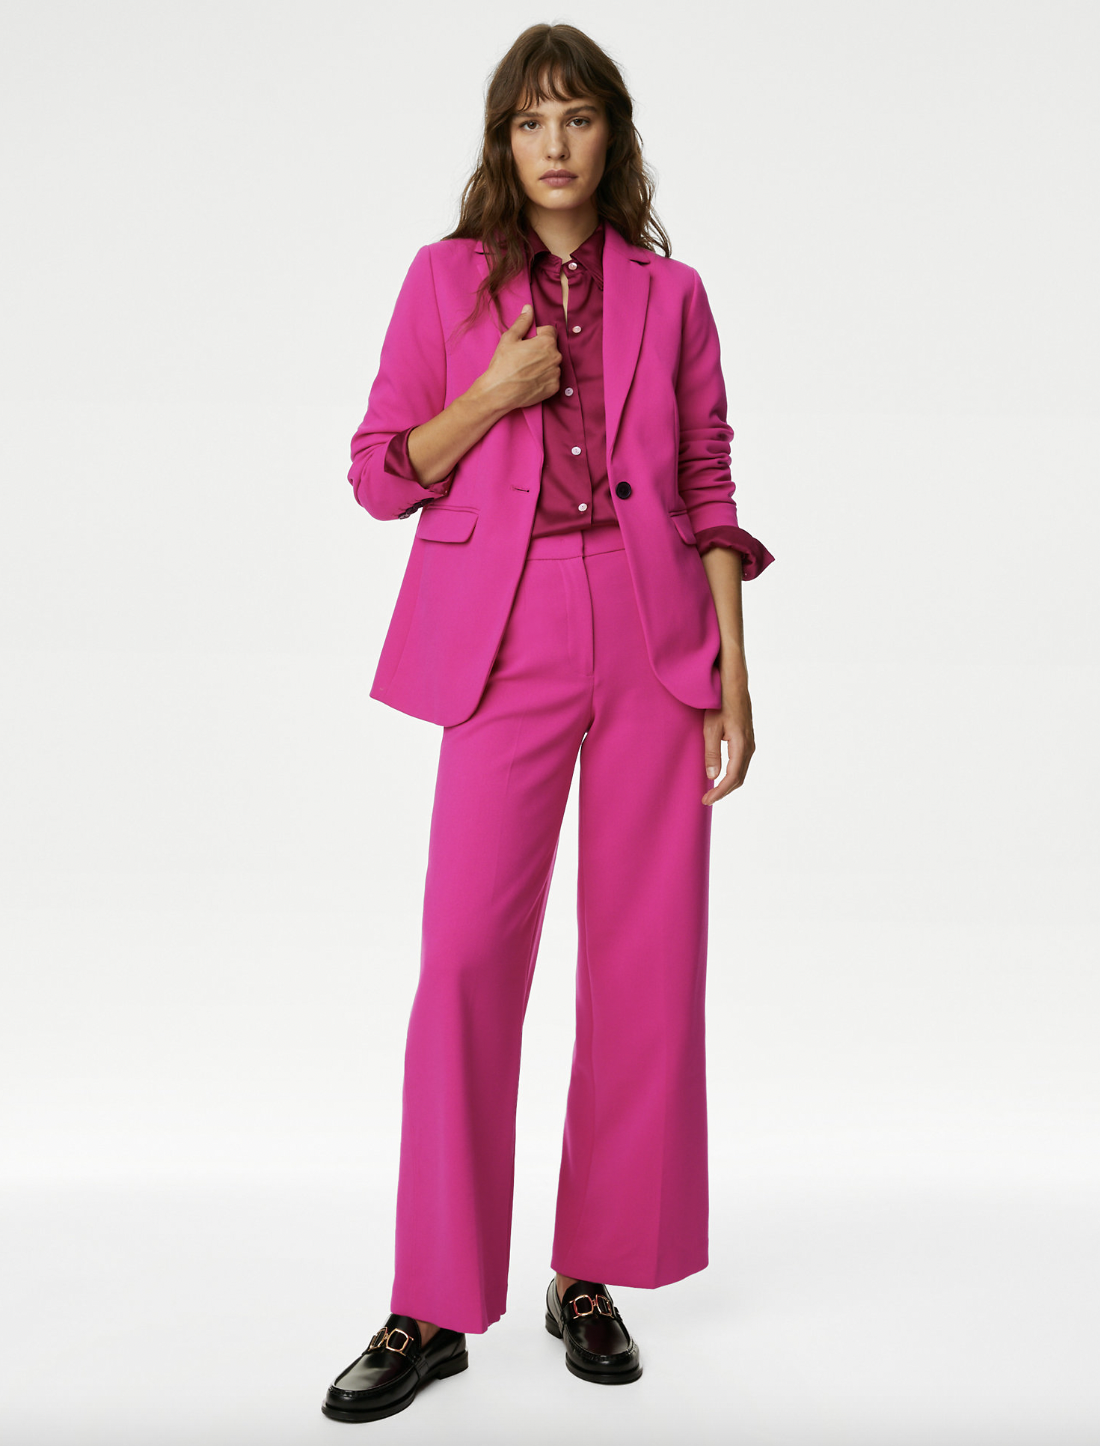 This bright pink shade is perfect for adding a pop of colour into your winter wardrobe. (M&S)